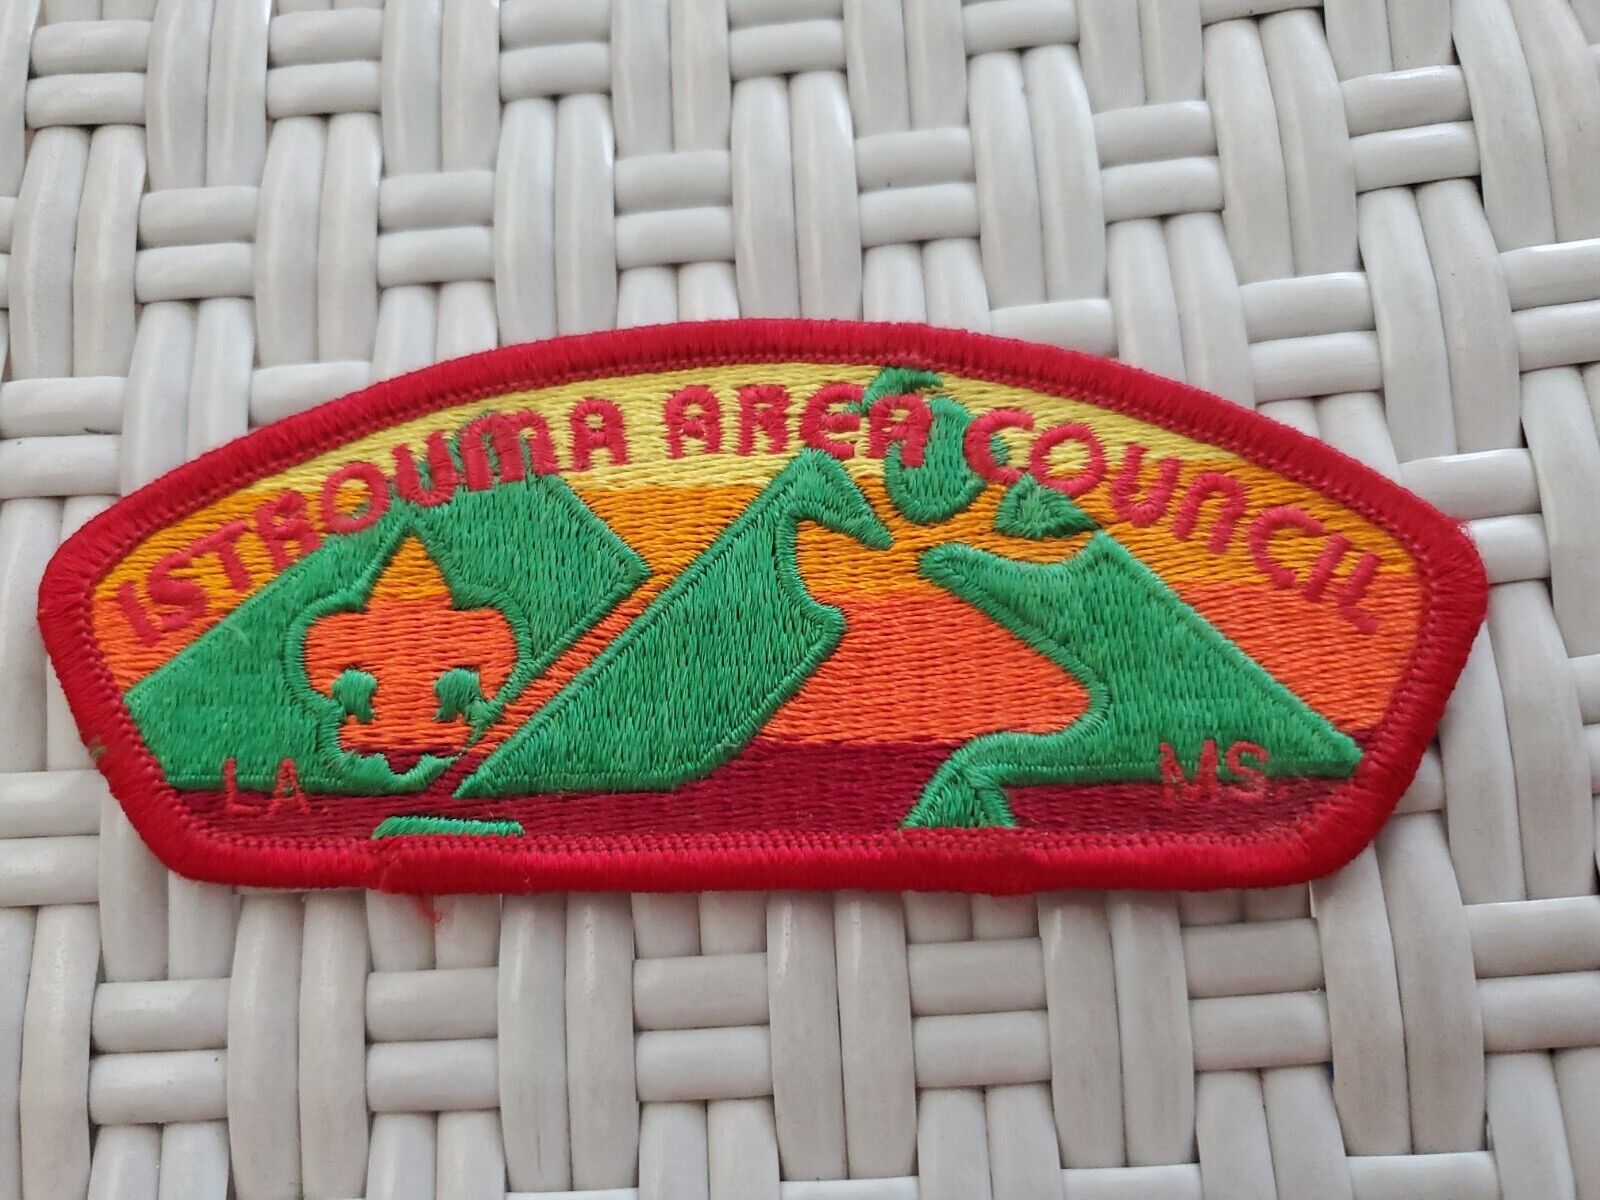 BSA ISTROUMA AREA COUNCIL OA 479 FLAP RARE VARIETY GREEN AND RED JSP CSP MINT